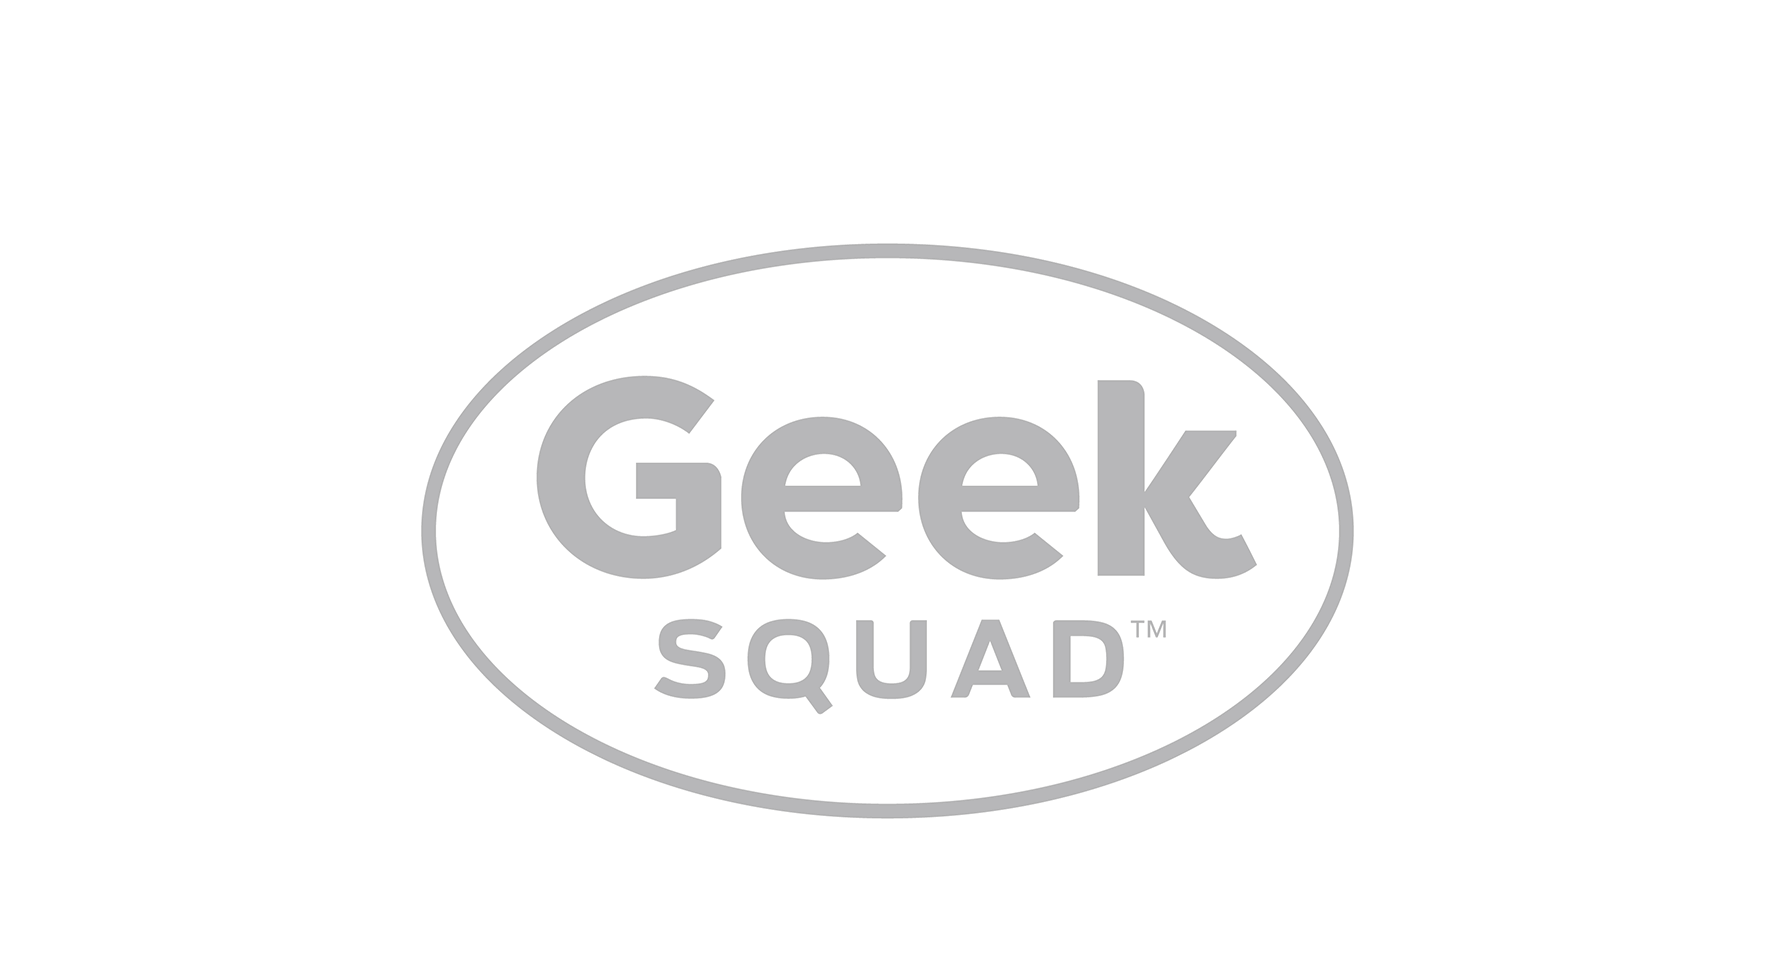 Geek Squad Replace